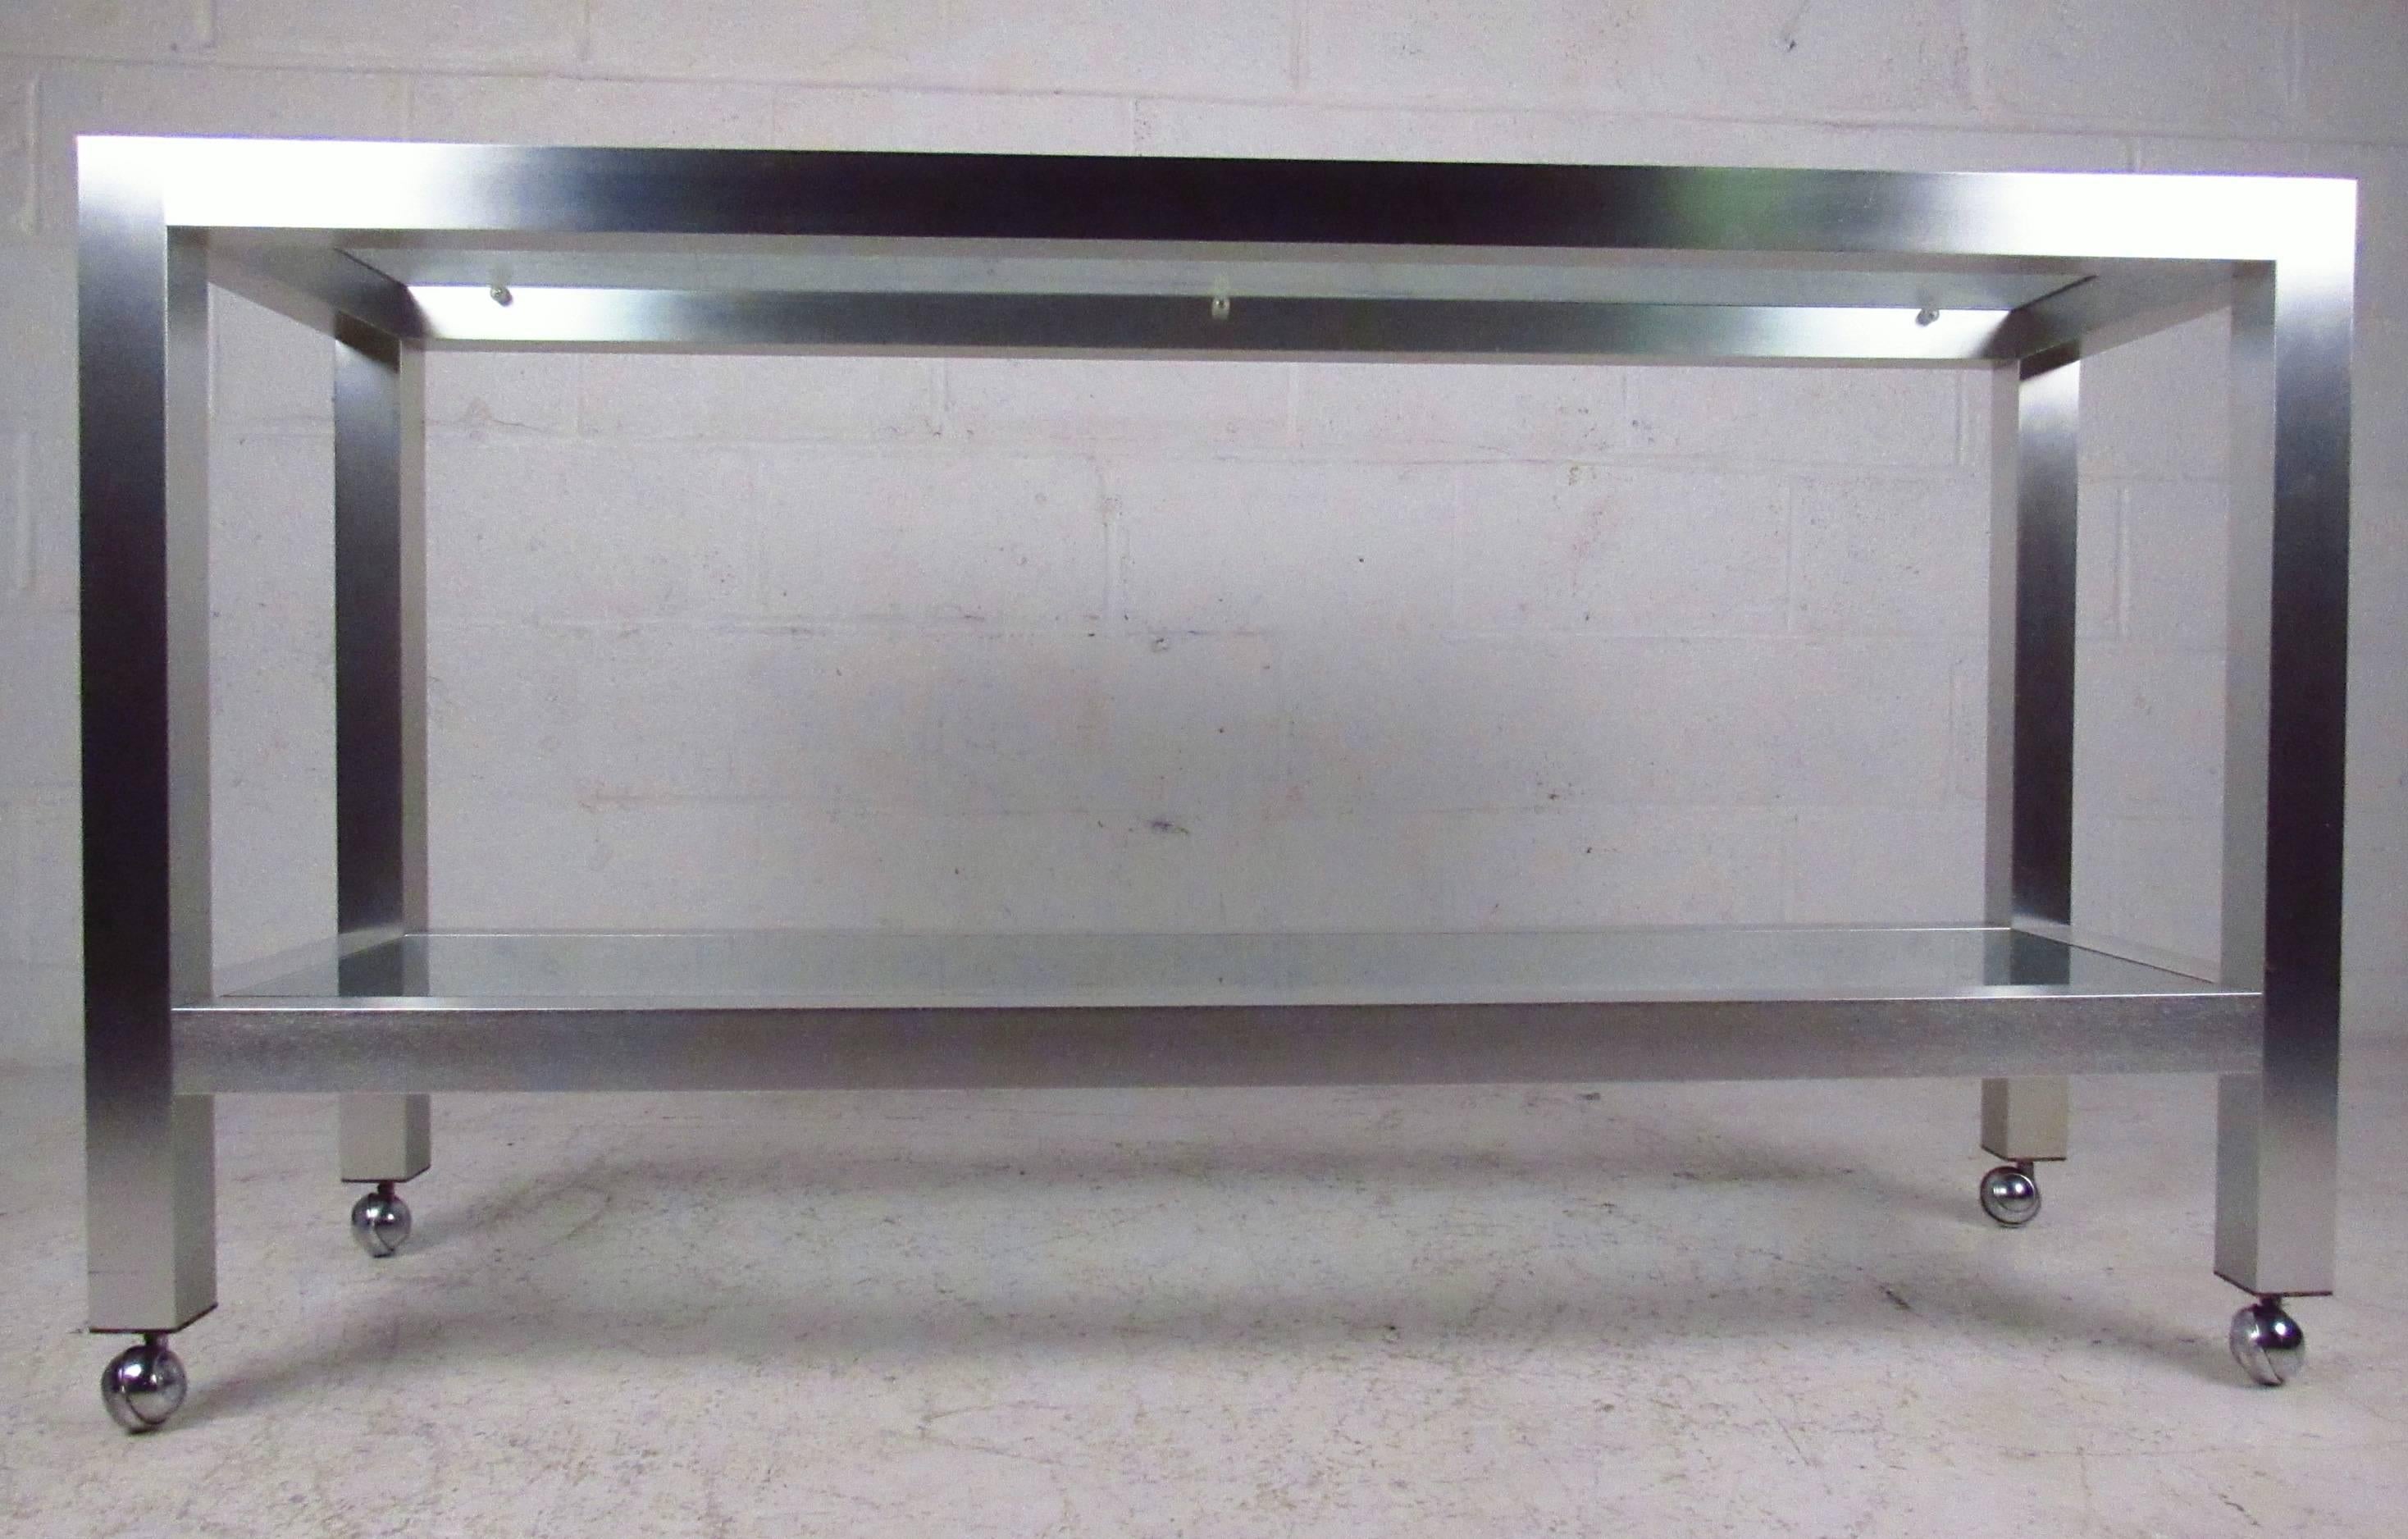 Mid-century aluminum console table with two glass shelves. Rolling casters allow easy mobility. Brass corner pieces accent the brushed chrome look.

(Please confirm item location - NY or NJ - with dealer)
